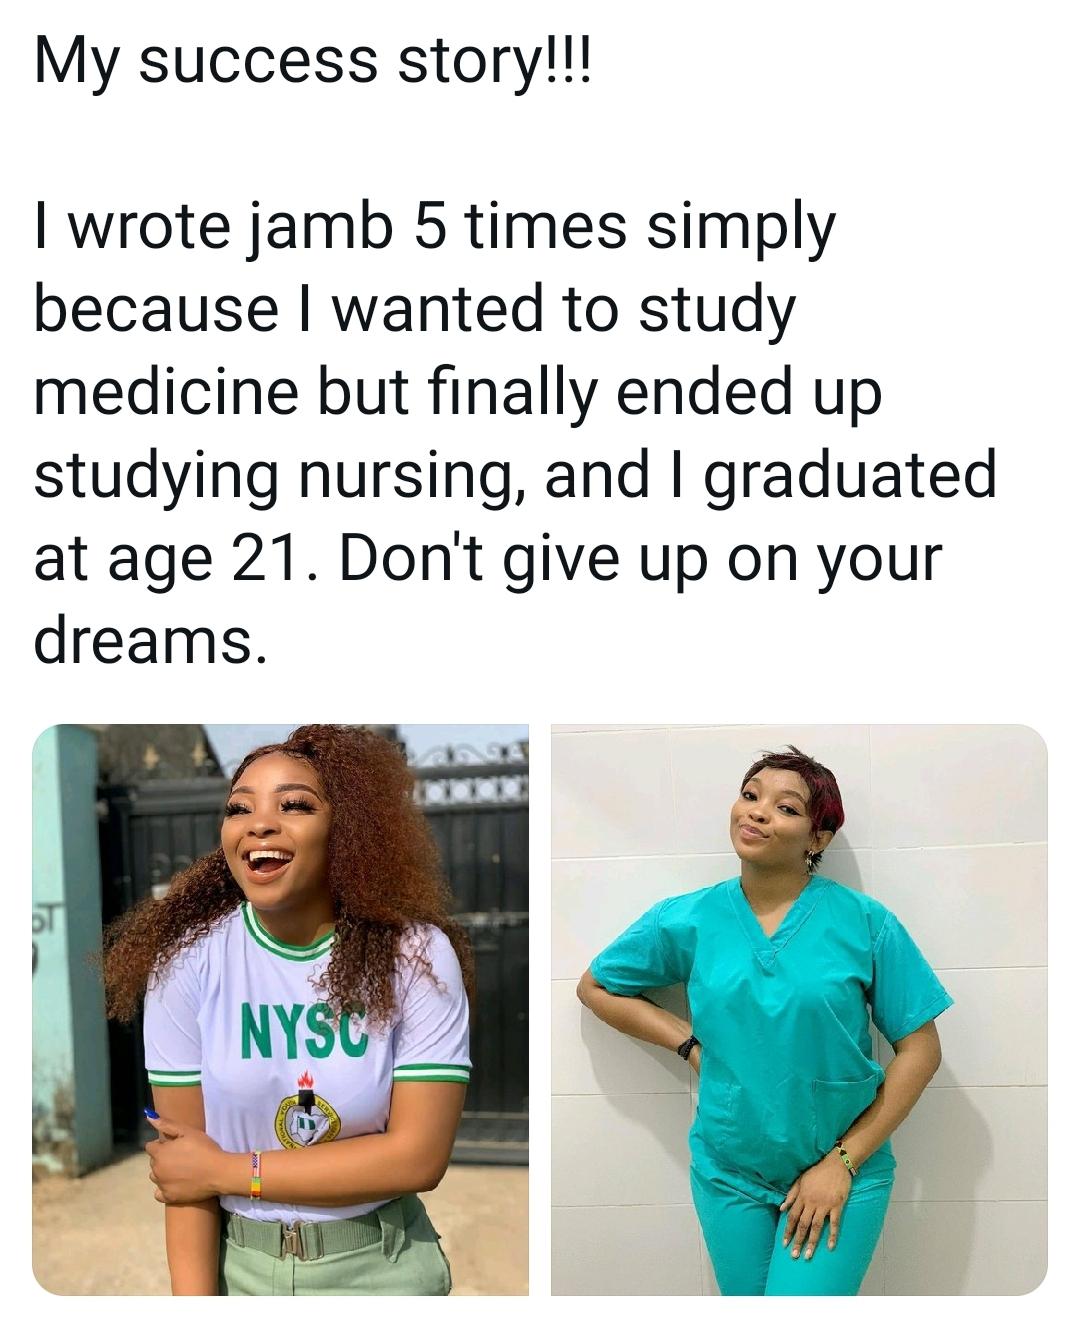 Cover Image for Wrote JAMB 5 times for Medicine but graduated a Nurse